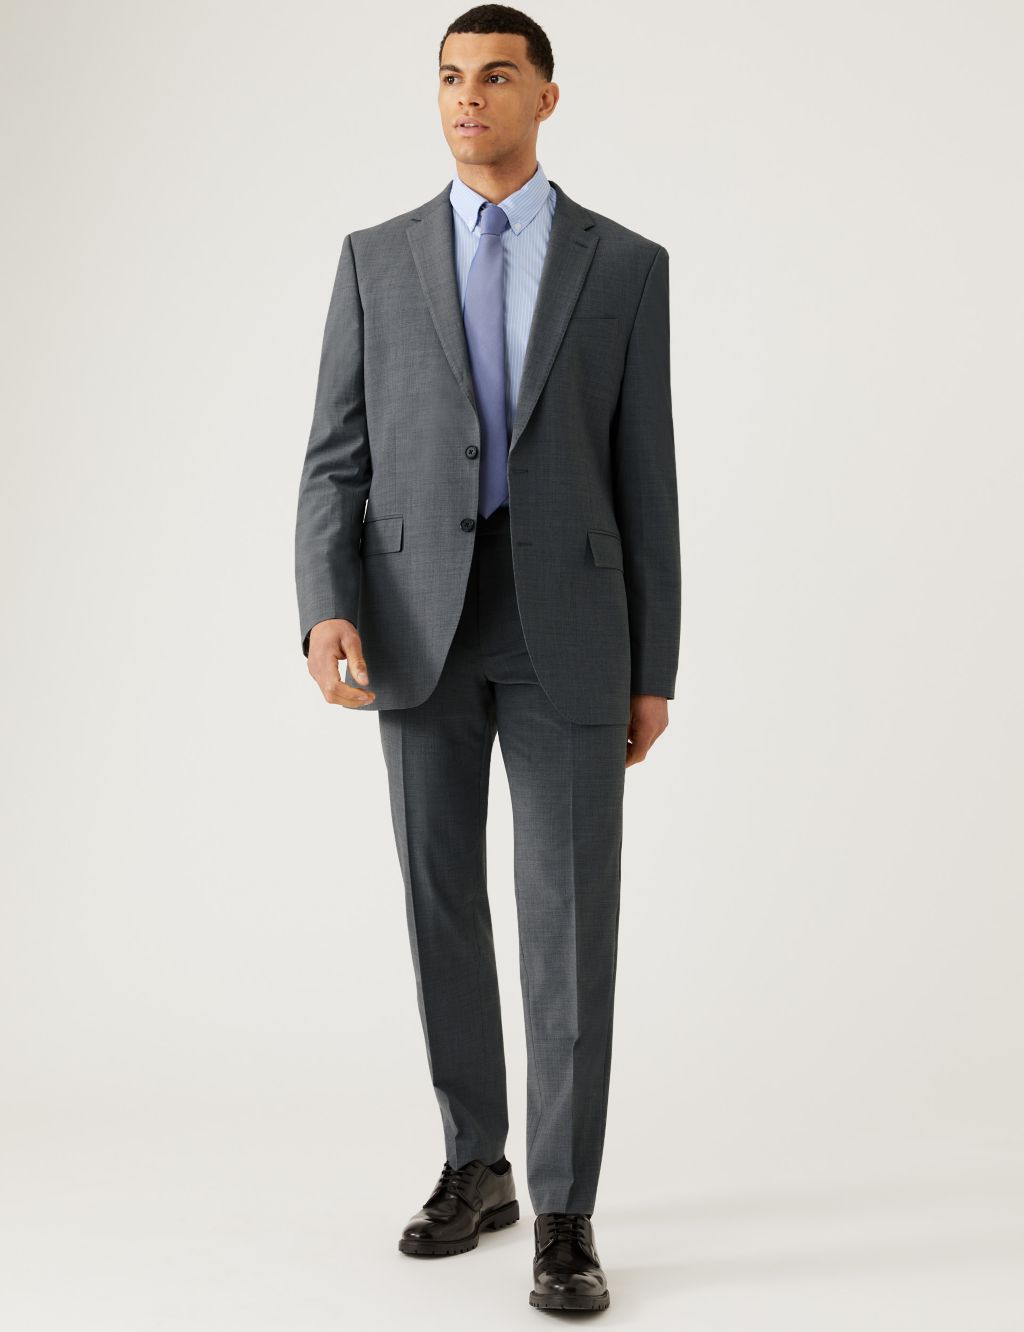 The Ultimate Tailored Fit Suit image 1